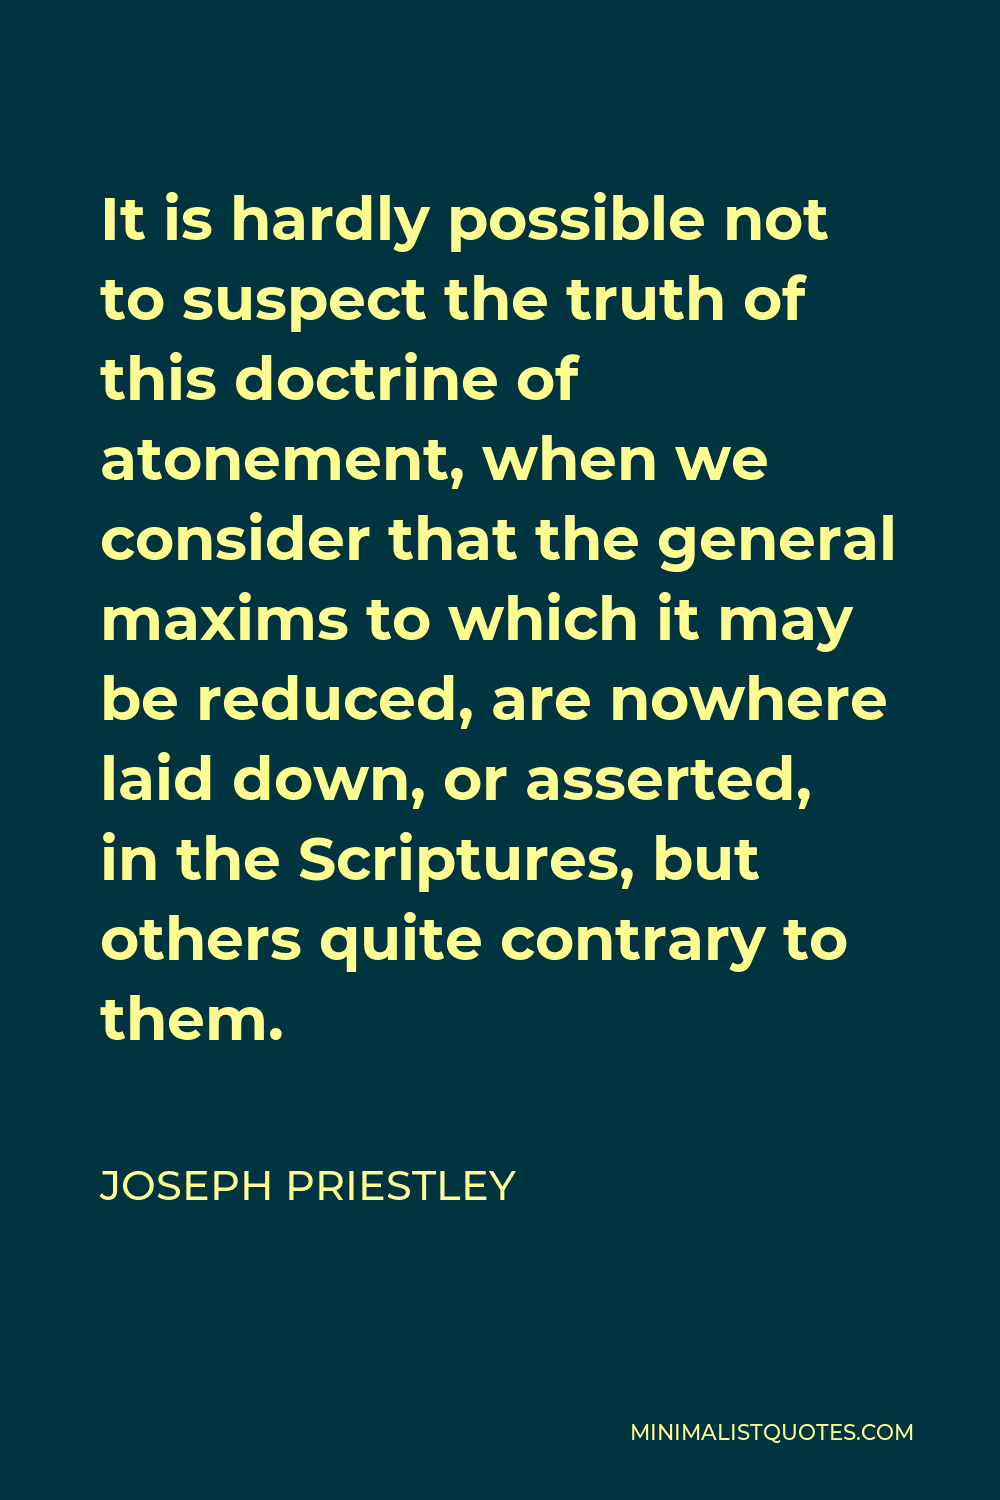 Joseph Priestley Quote - It is hardly possible not to suspect the truth of this doctrine of atonement, when we consider that the general maxims to which it may be reduced, are nowhere laid down, or asserted, in the Scriptures, but others quite contrary to them.